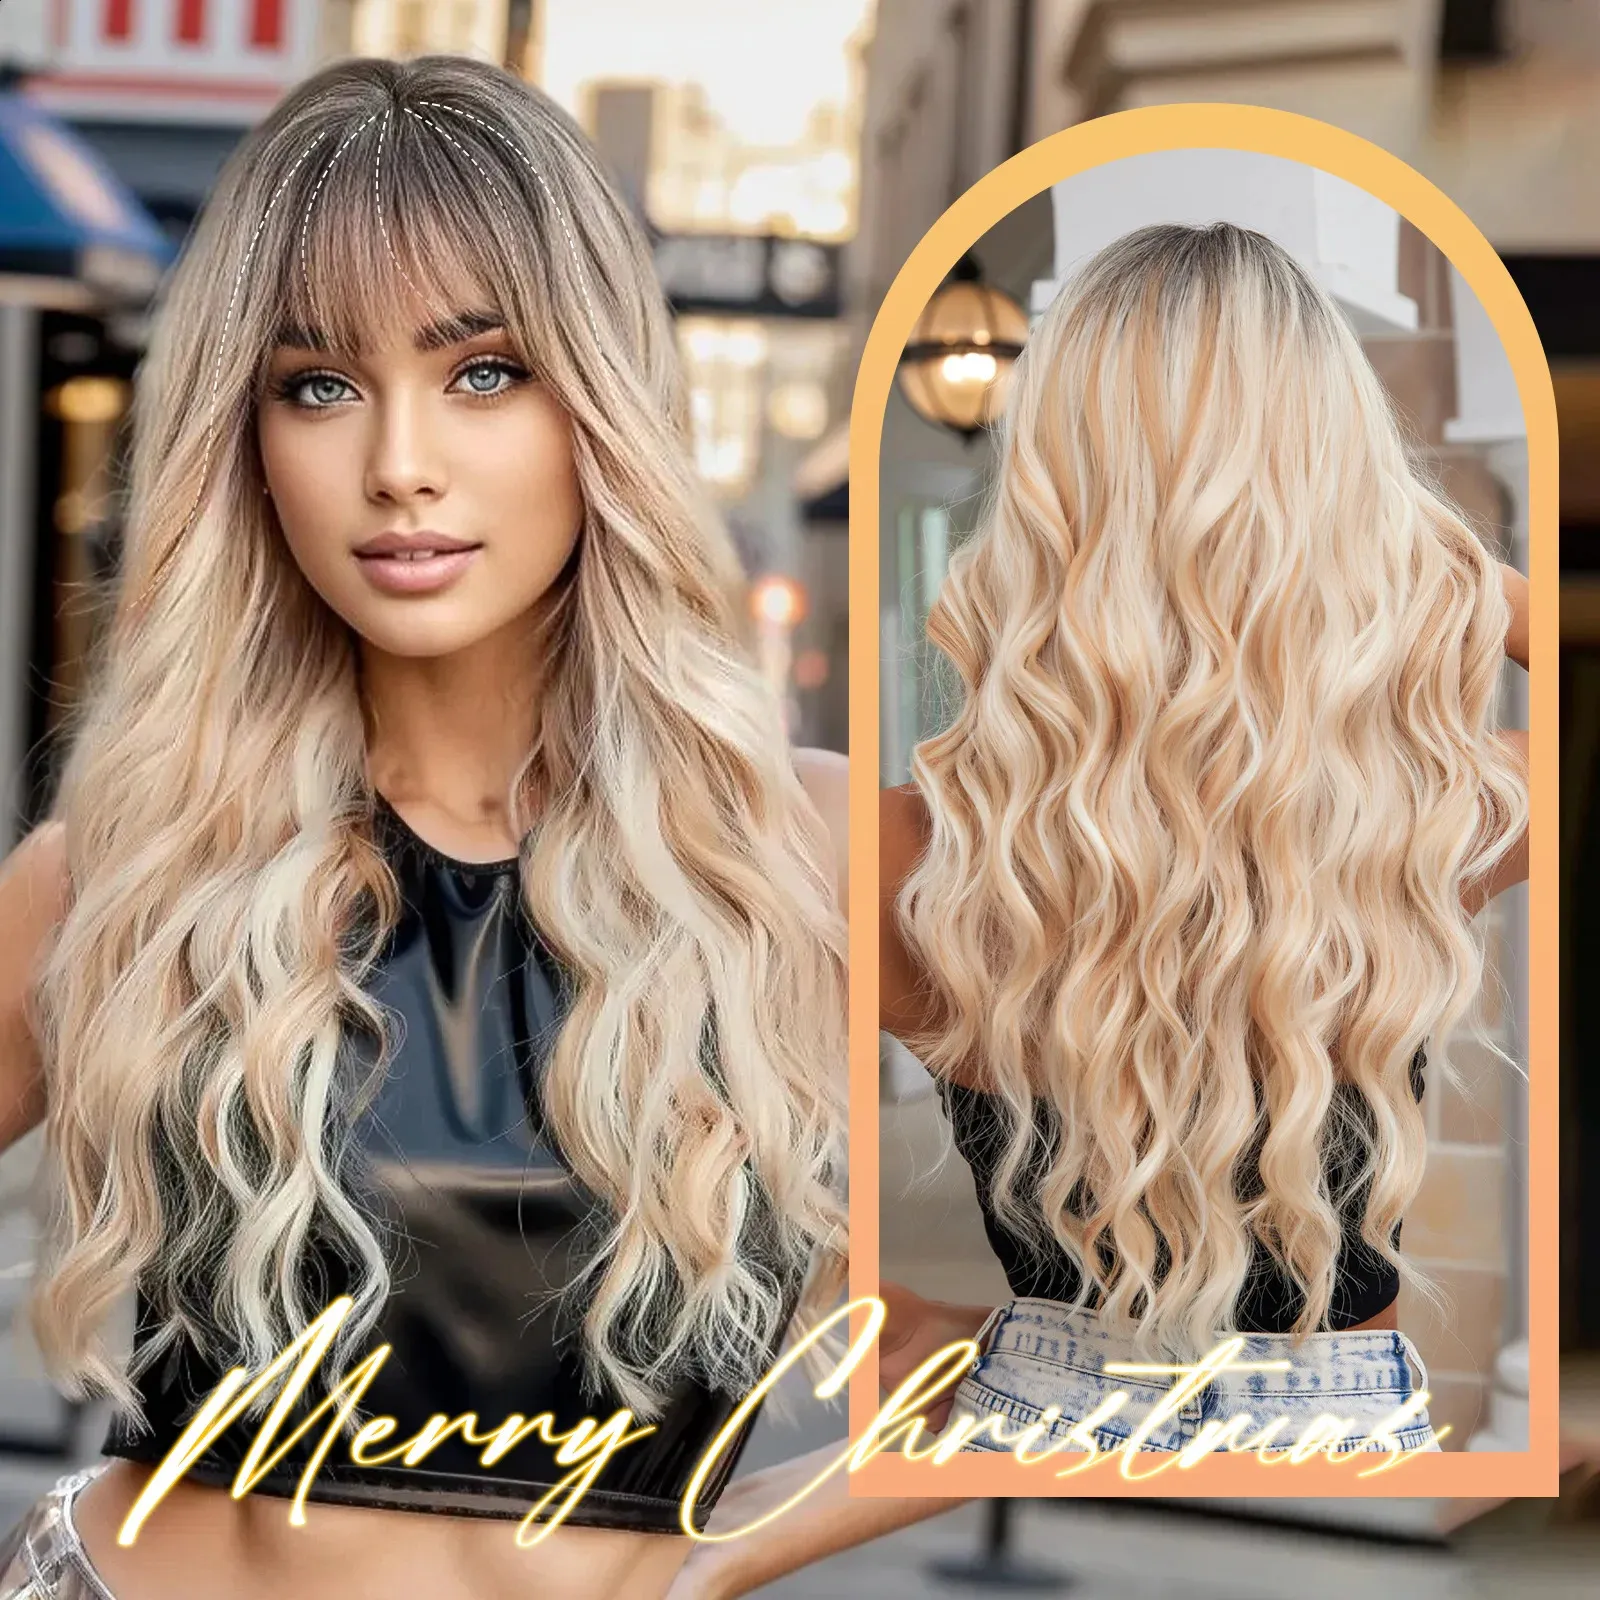 Blonde Unicorn Ombre Brown Synthetic Long Wavy s with Bangs Daily Cosplay Party Use Heat Resistant Fiber for Women 240327